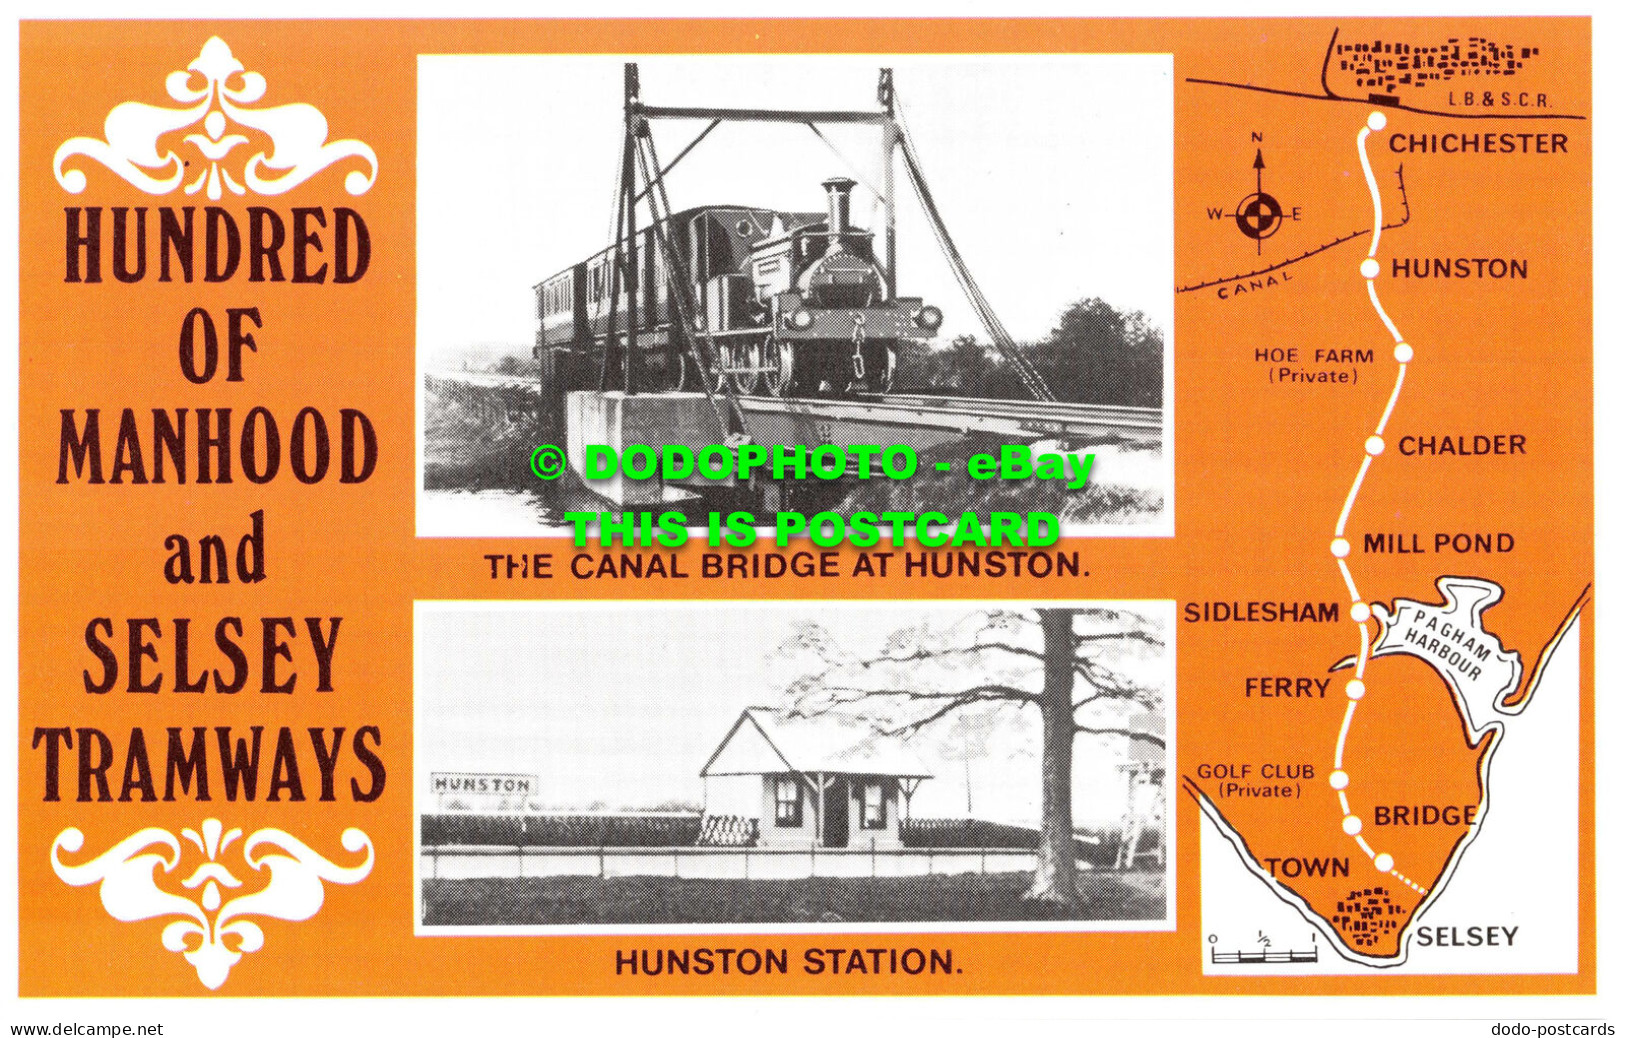 R542970 Hundred Of Manhood And Selsey Tramways. Hunston Station. Dalkeith Pictur - World